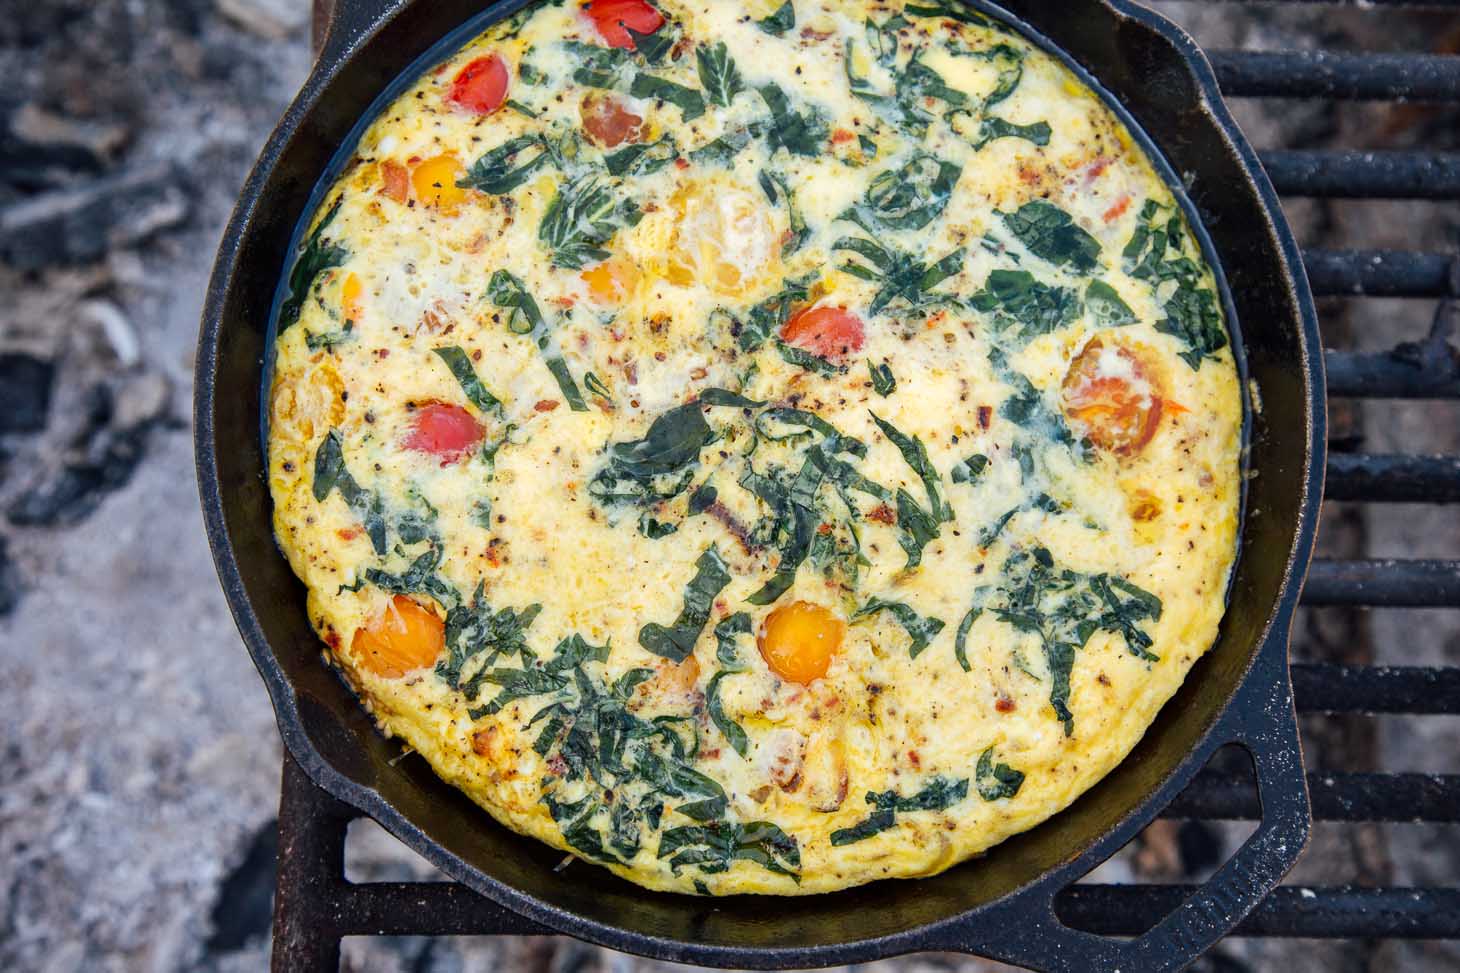 Vegetable frittata in a cast-iron skillet over a campfire.